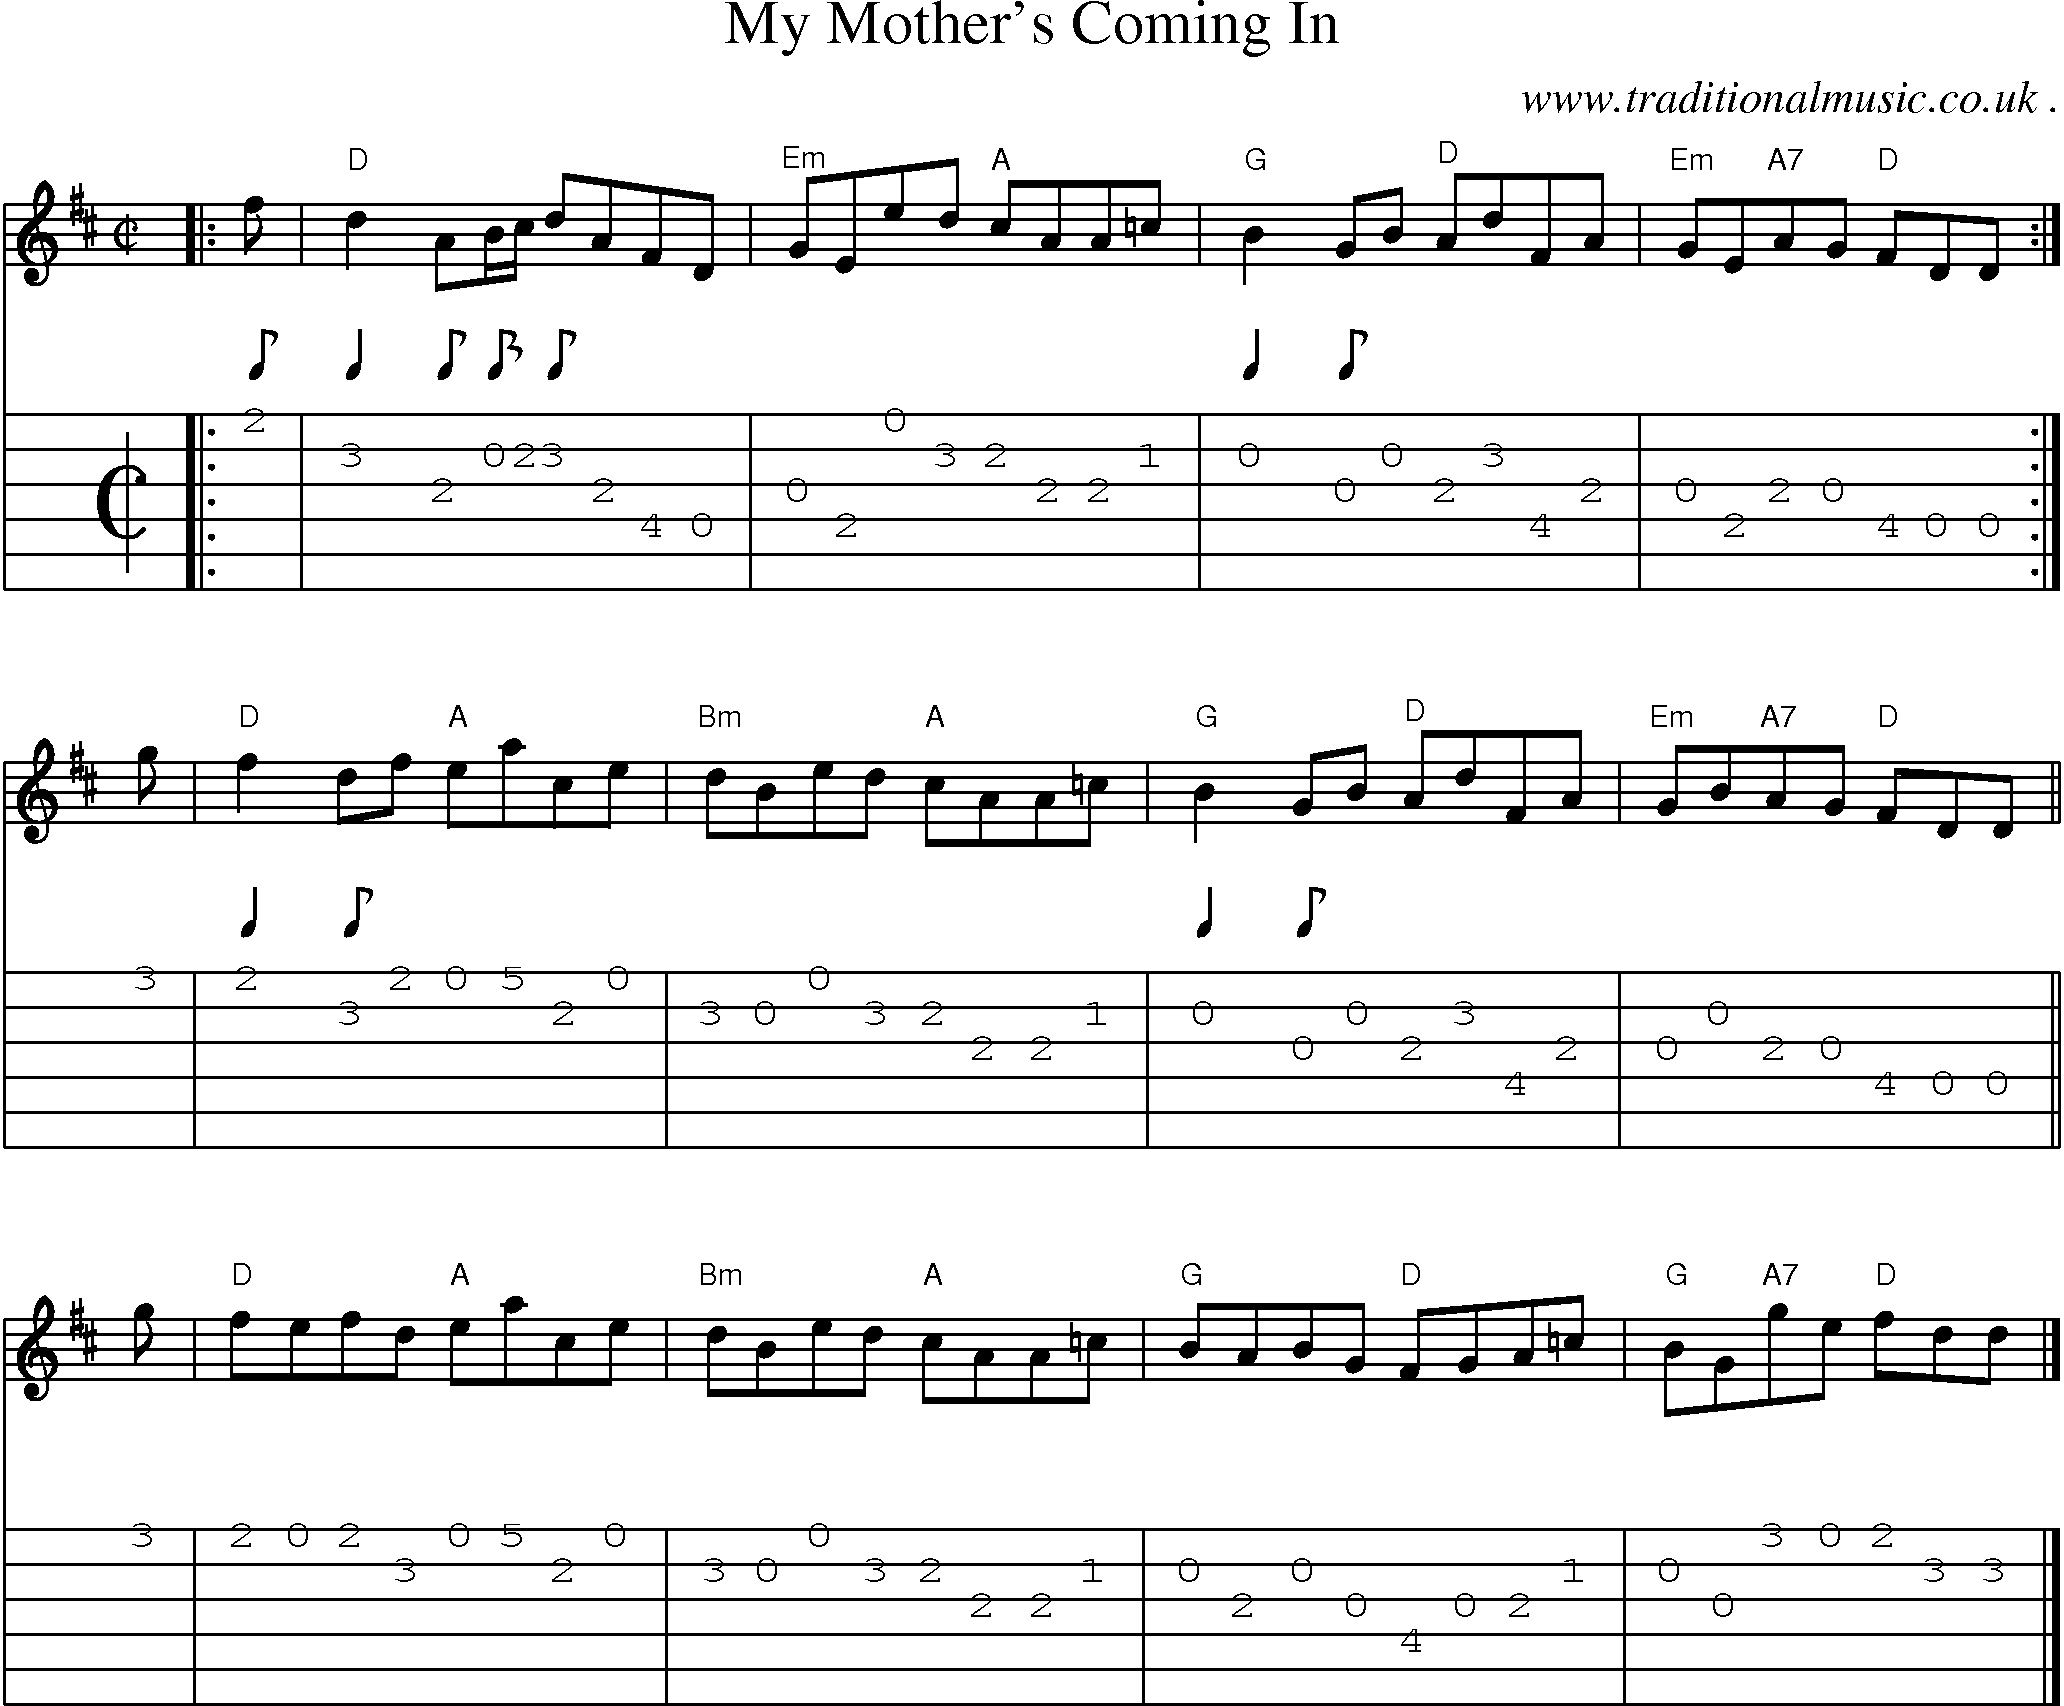 Sheet-music  score, Chords and Guitar Tabs for My Mothers Coming In